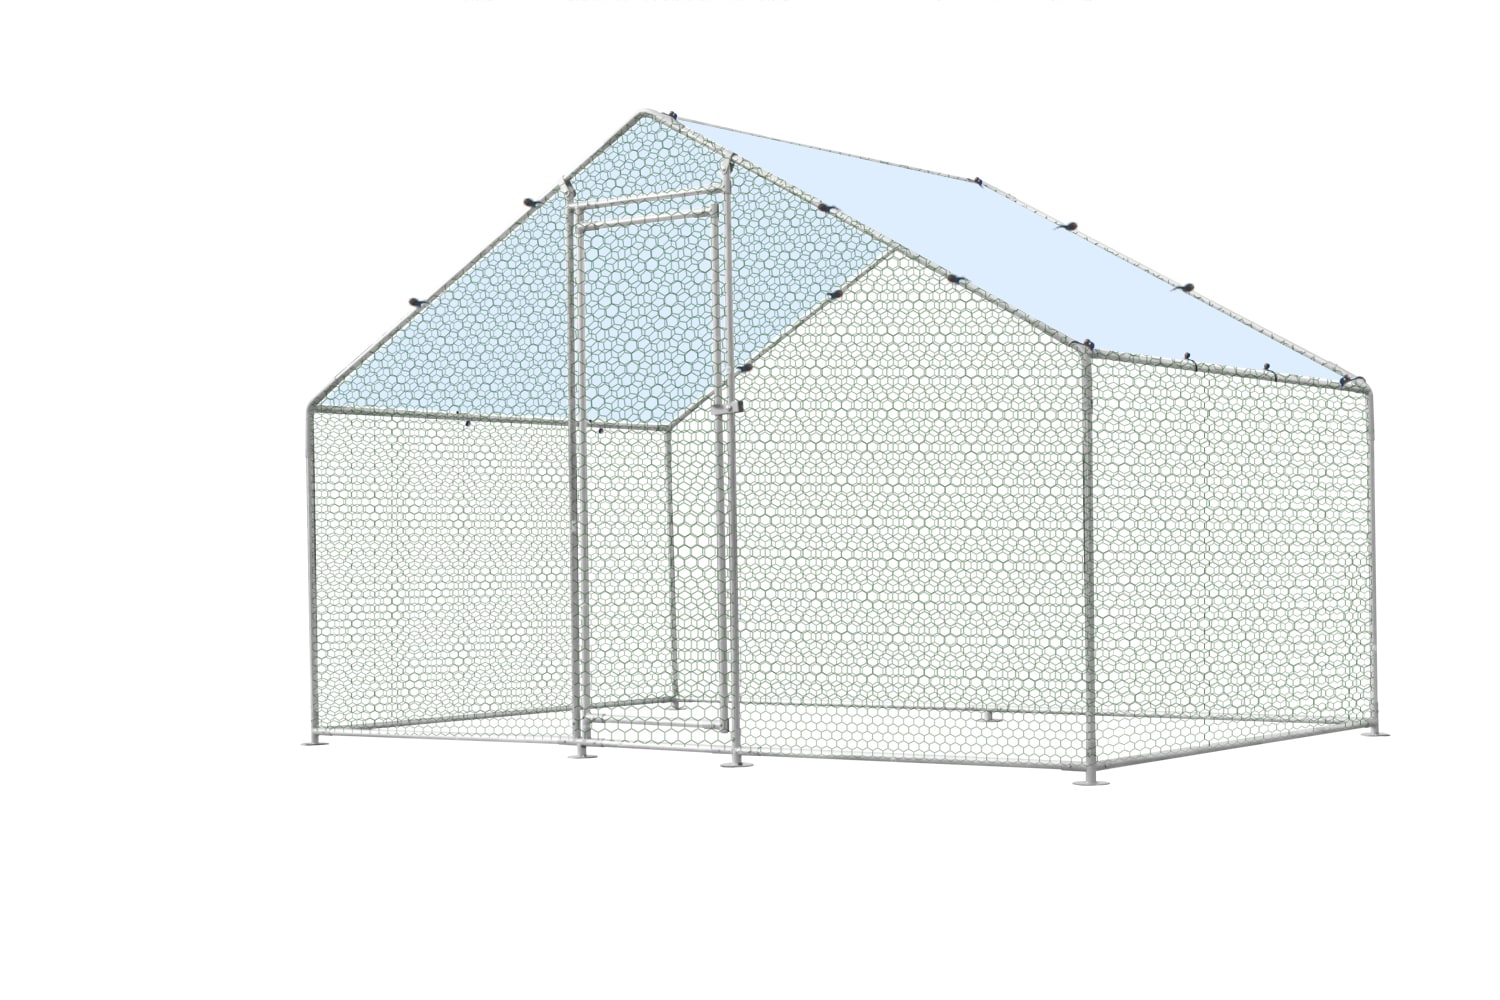 Kahomvis Metal Chicken Coop – Silver, Large Size, Removable PE Cover, Durable Construction – Perfect for Outdoor Use, Protects Poultry from Predators